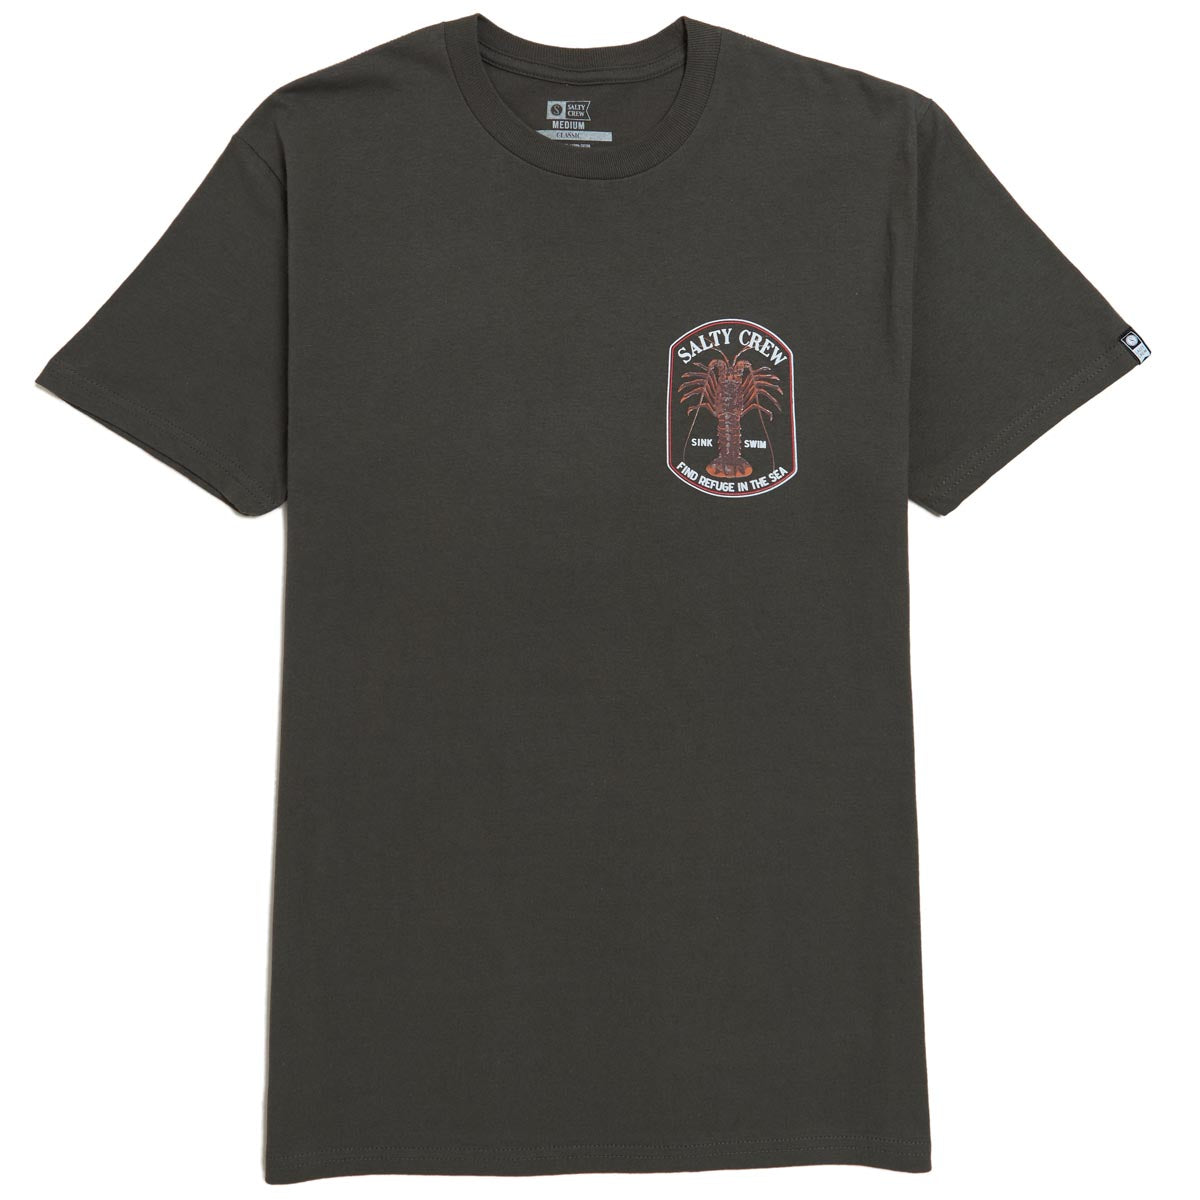 Salty Crew Spiny Classic T-Shirt - Charcoal image 4